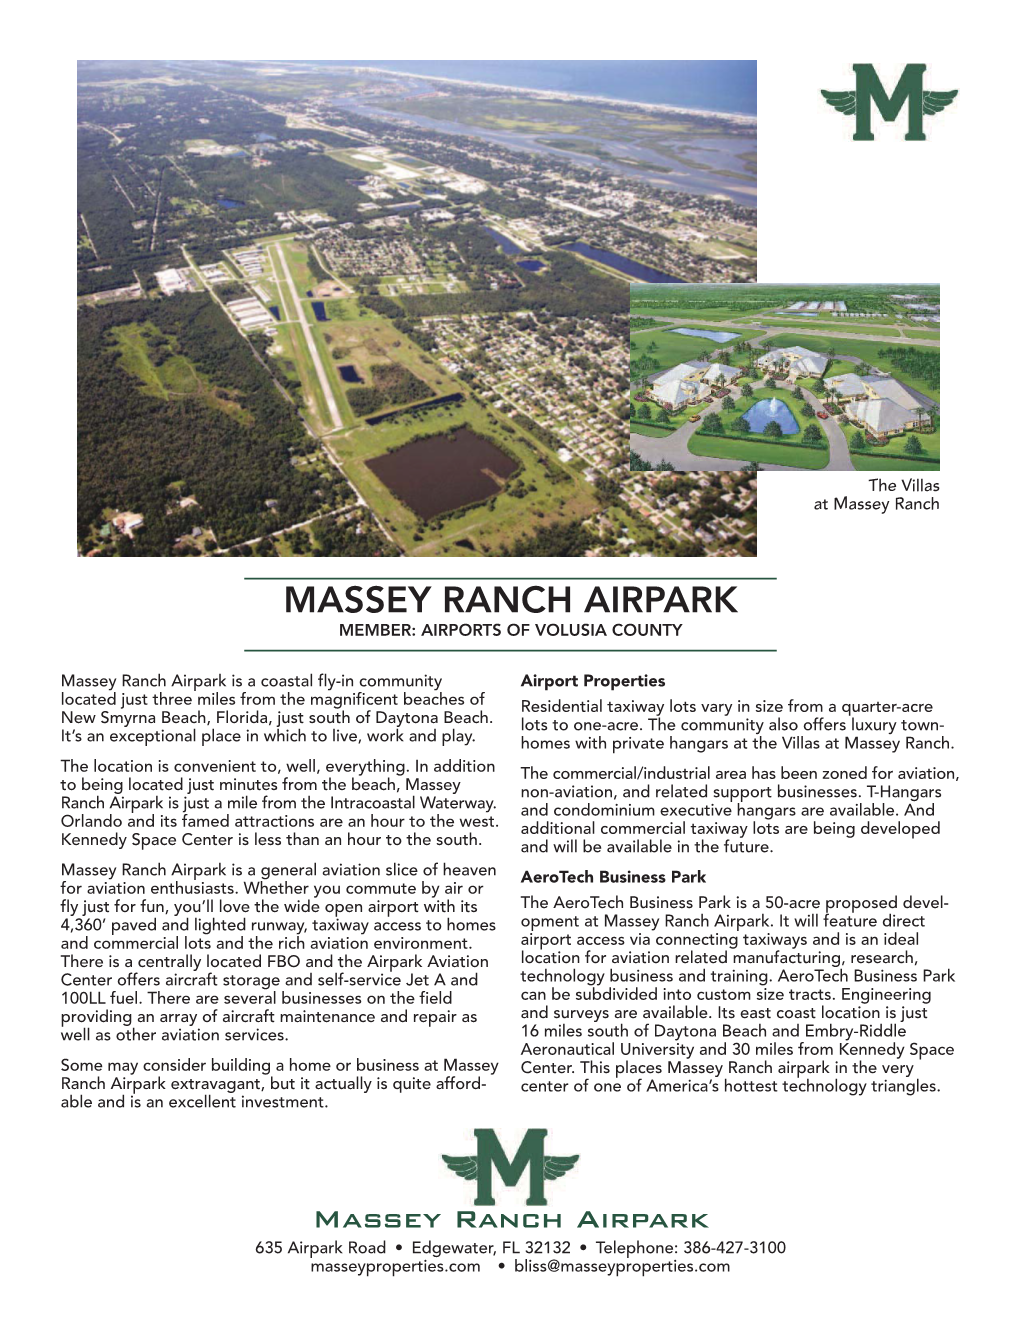 Massey Ranch Airpark Member: Airports of Volusia County